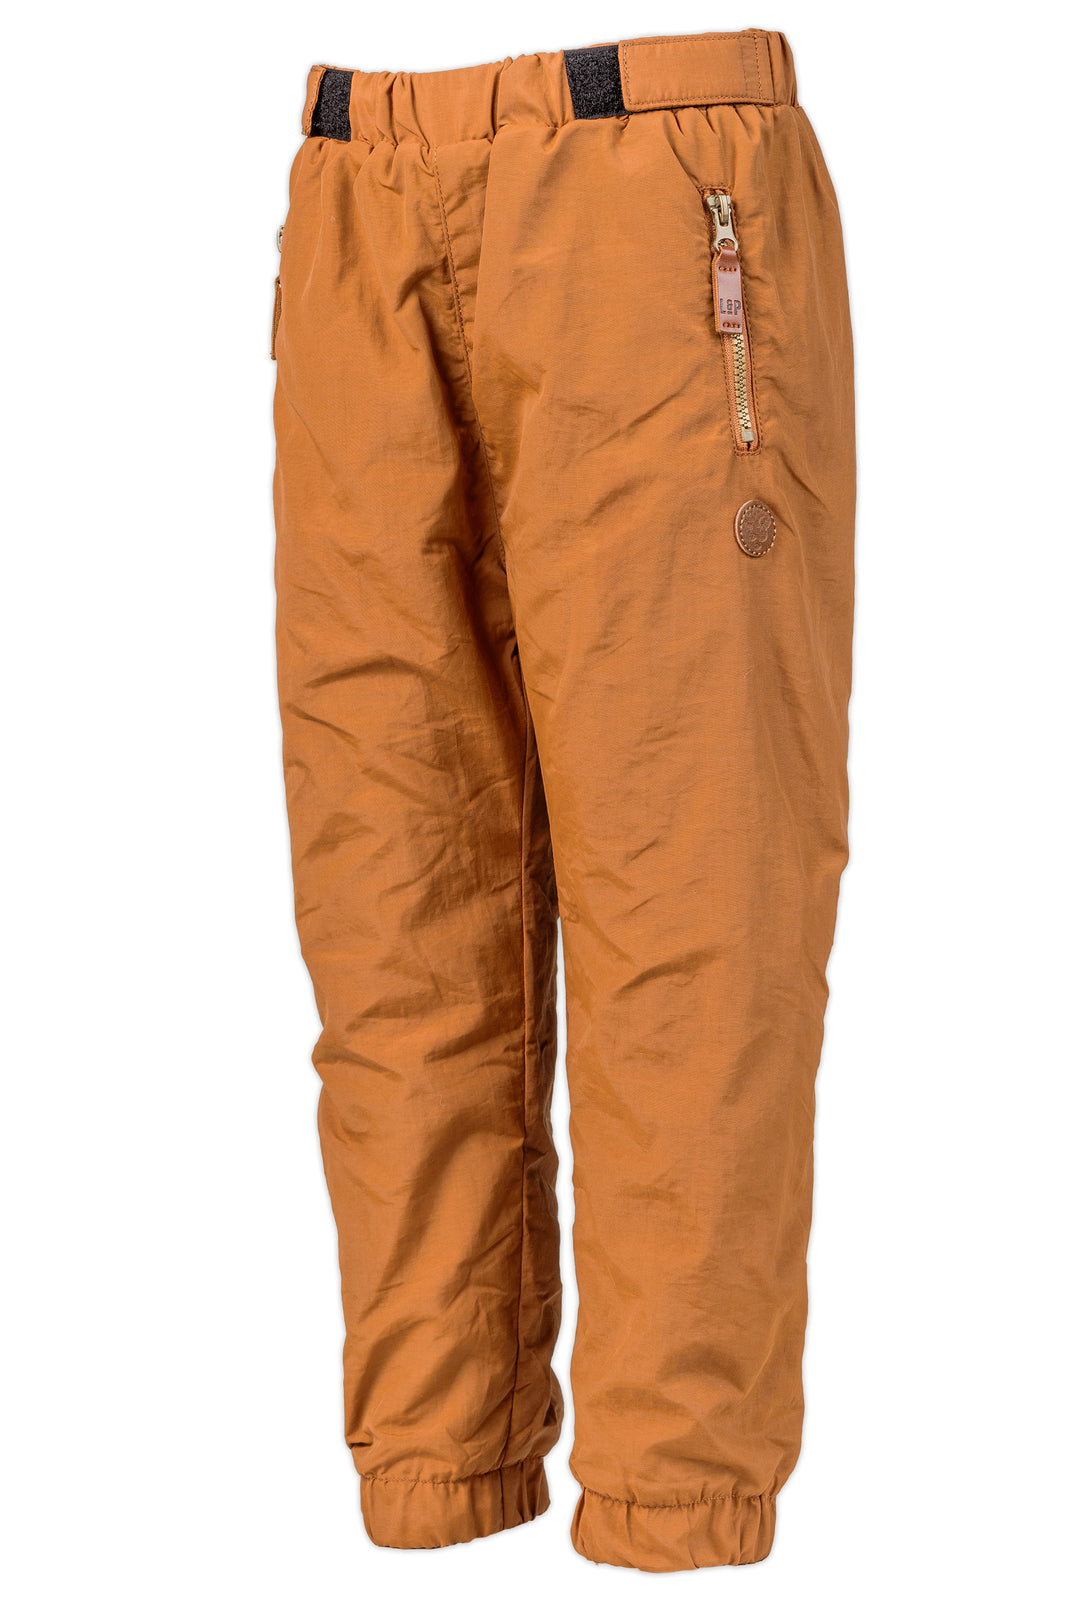 Cotton Lined Outdoor Pants [224] [Kids]